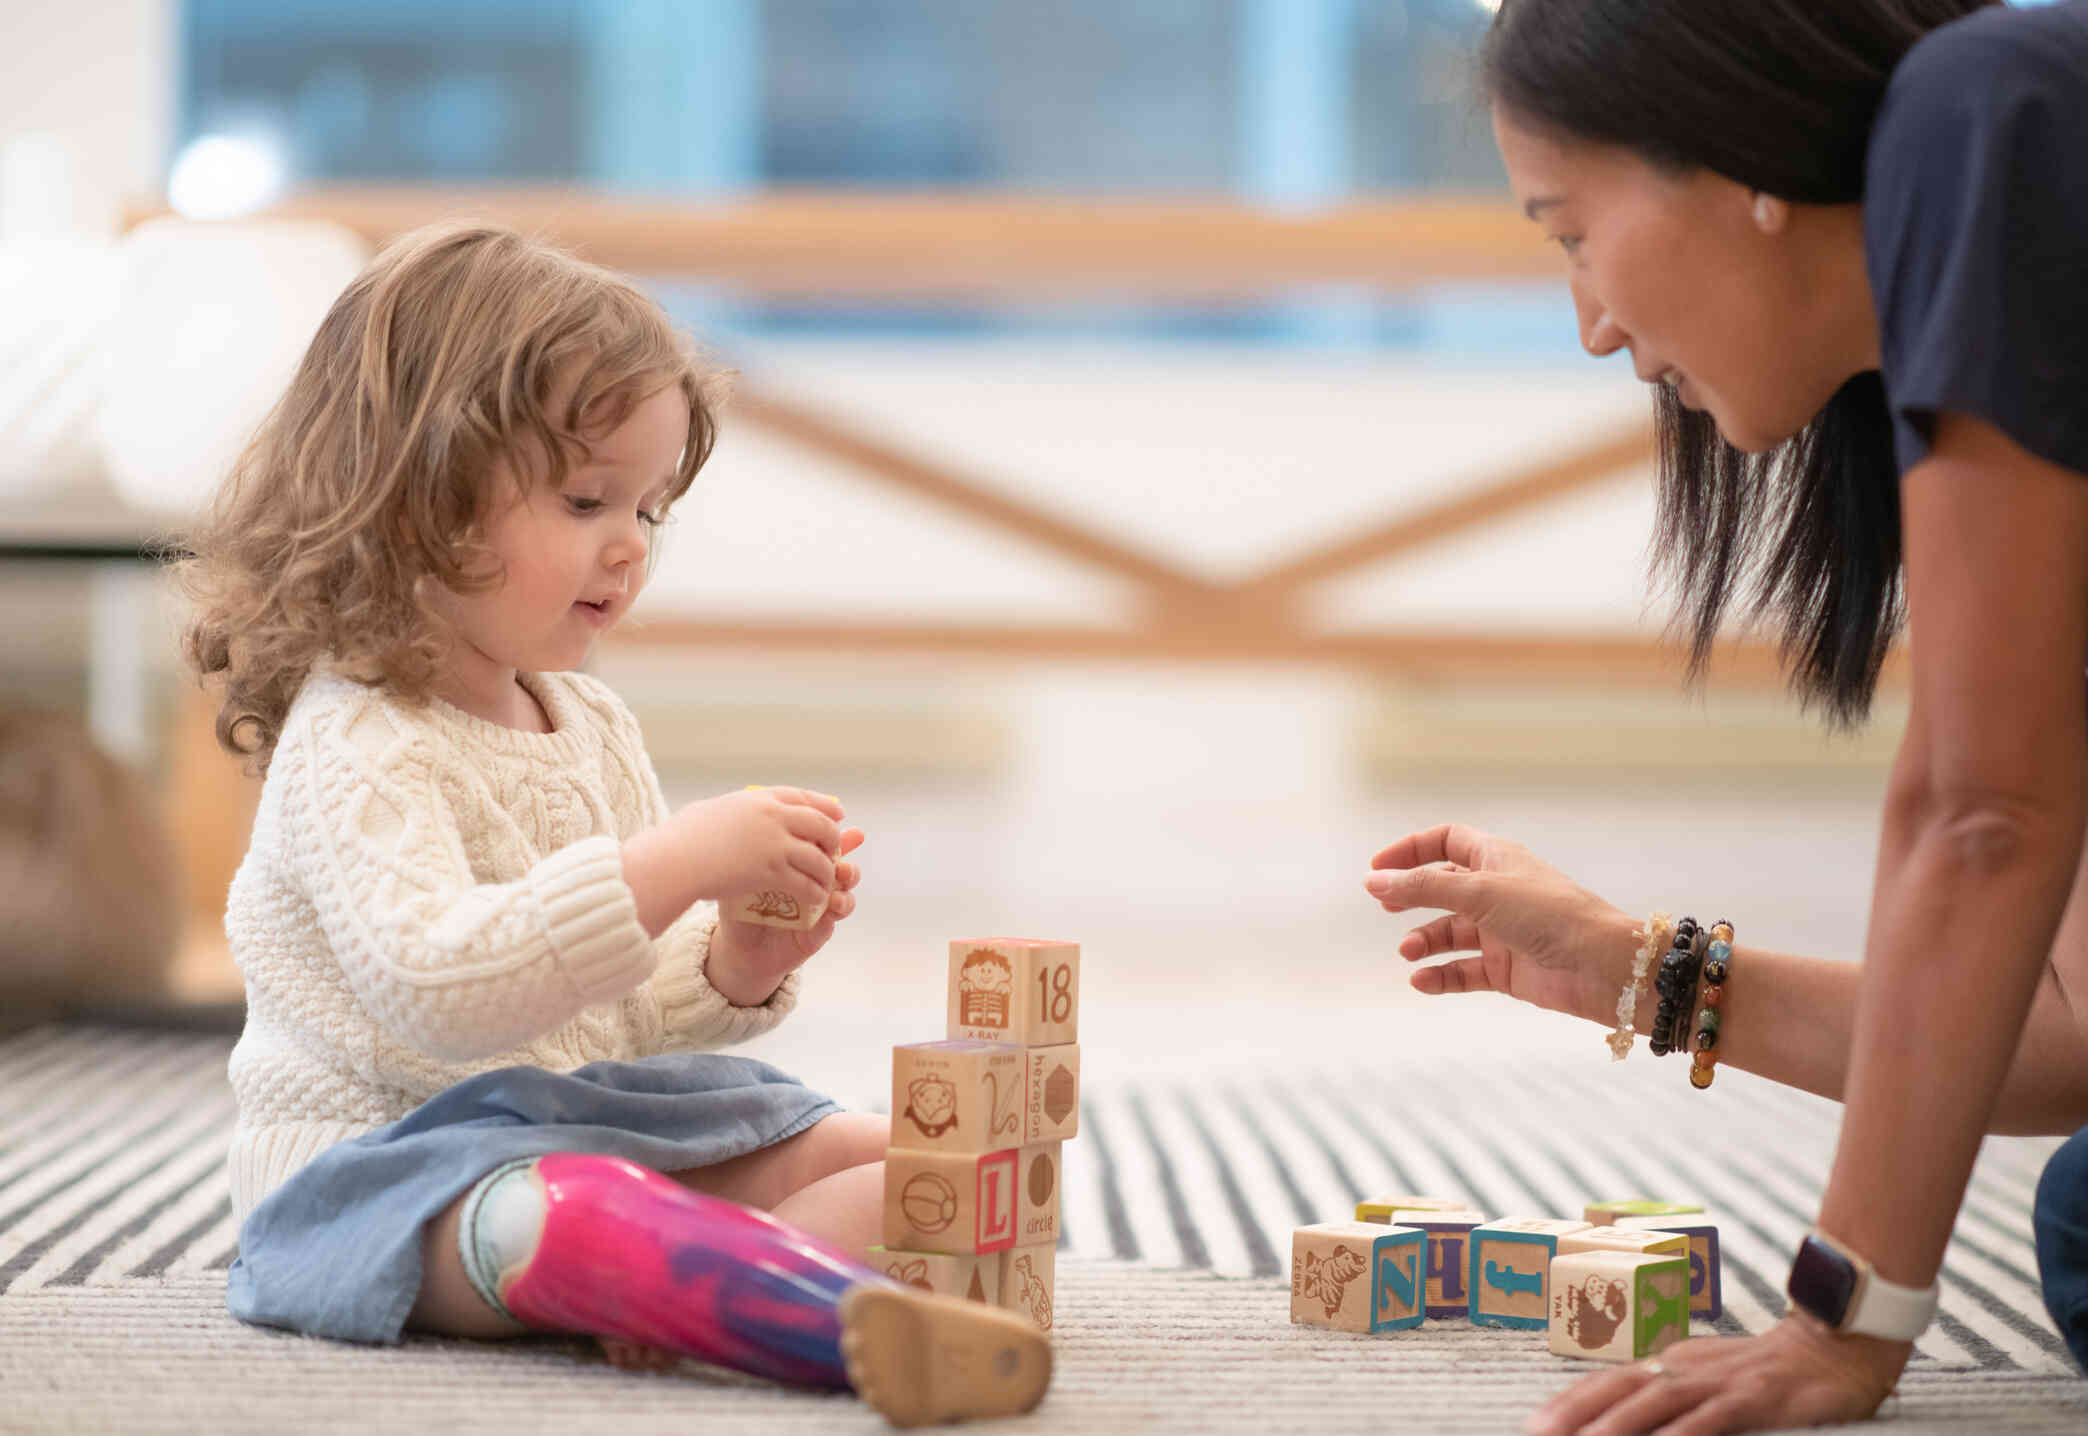 A young girl with a prosthetic leg sits on the foor and plays with some blocks as a woman leans down to smile at her.